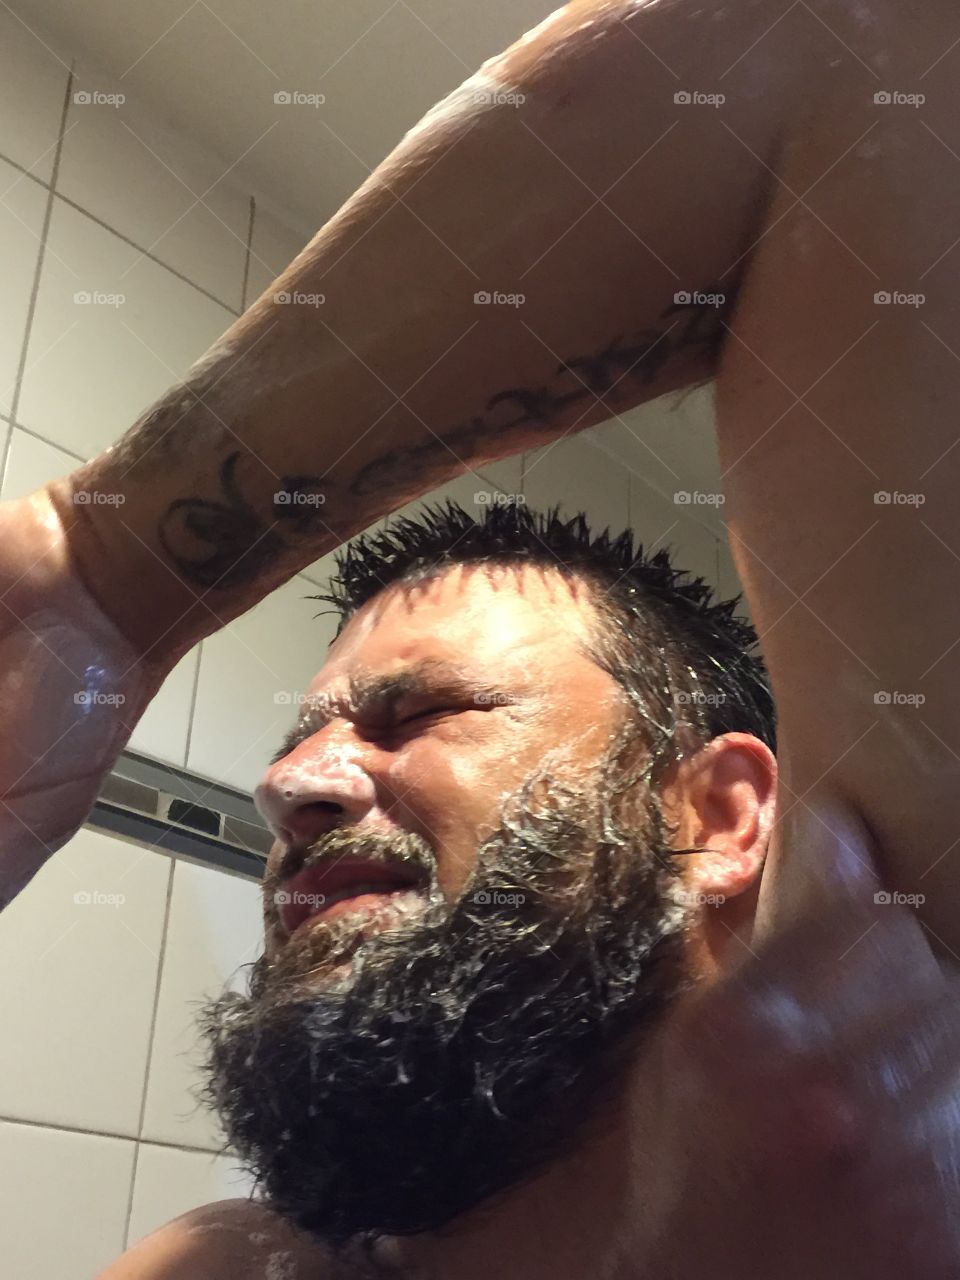 Getting clean in the shower
Soapy face
